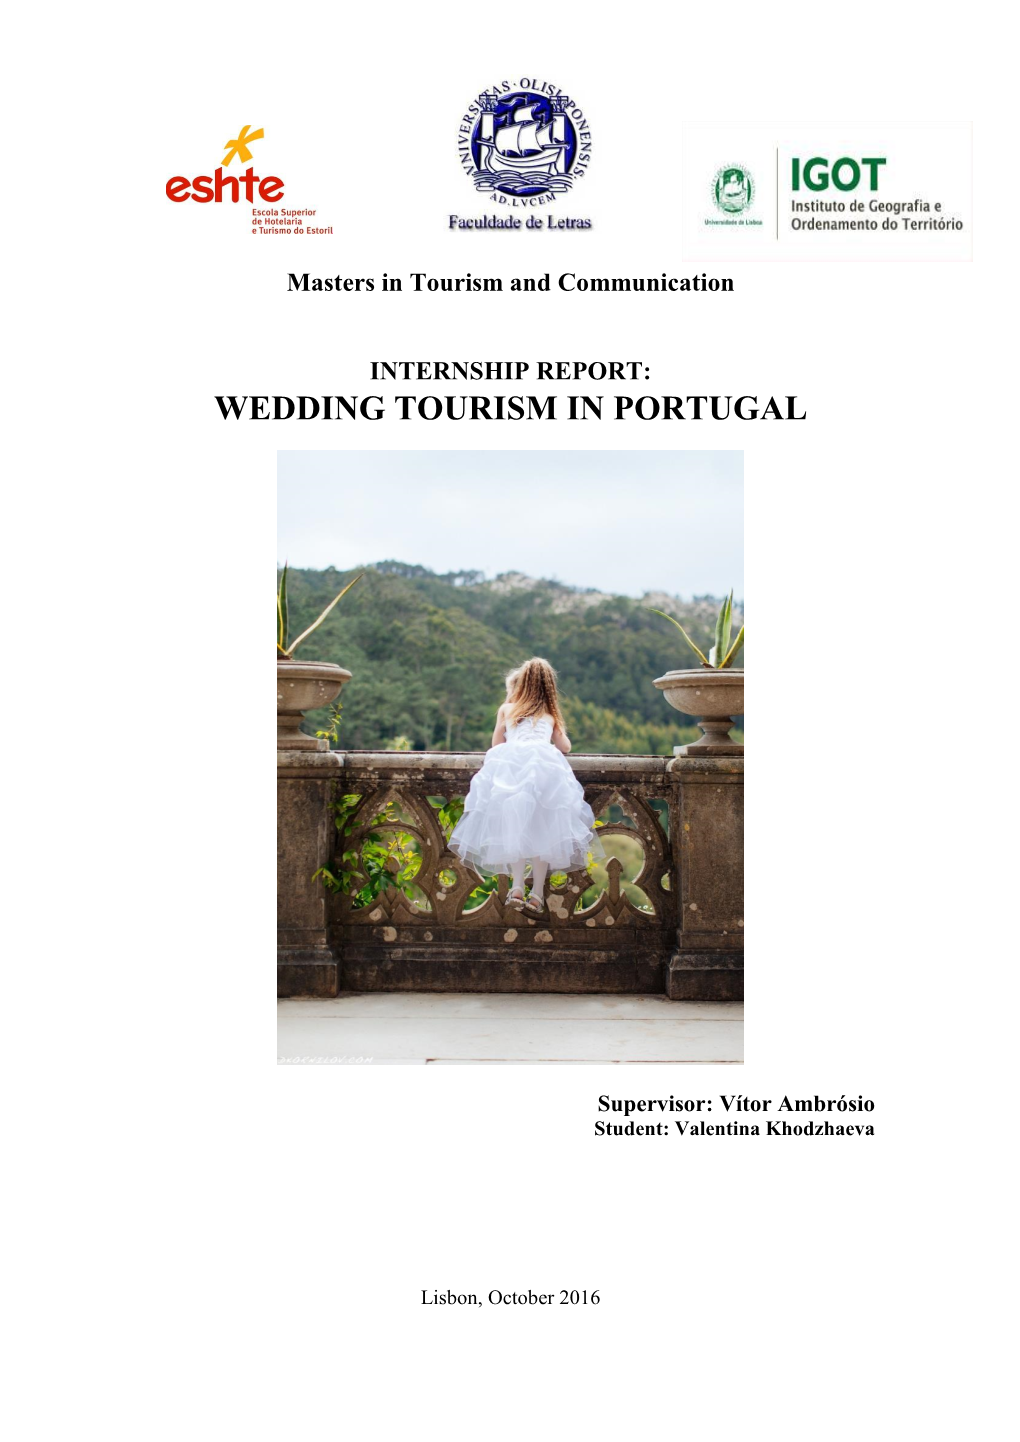 Wedding Tourism in Portugal